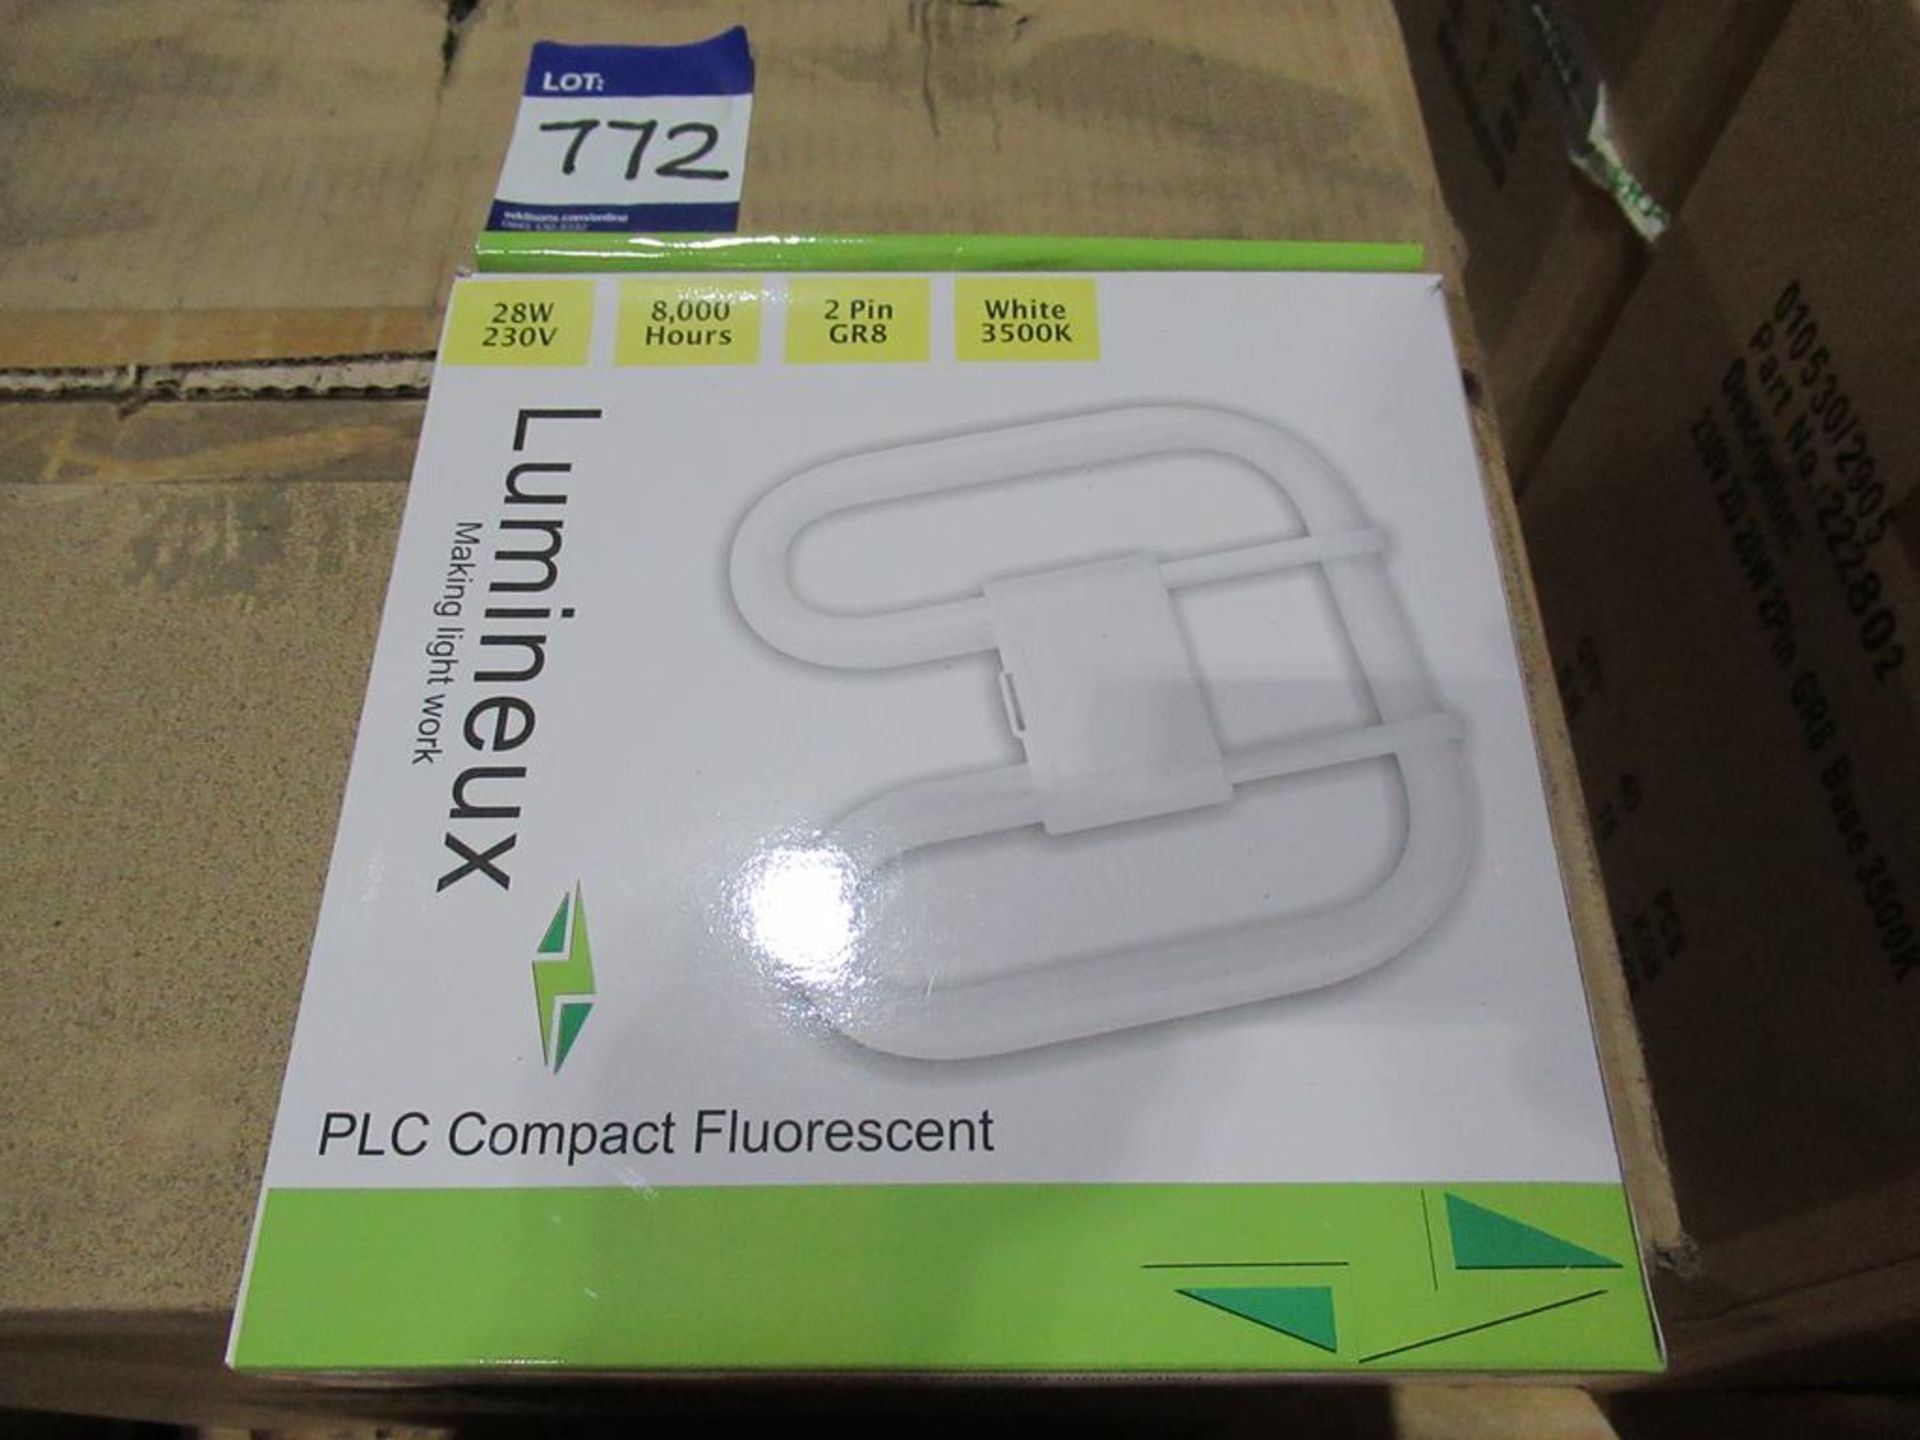 40 x 2 Pin 28W 230V White 3500K PLC Compact Fluorescent OEM Trade Price £153 - Image 3 of 3